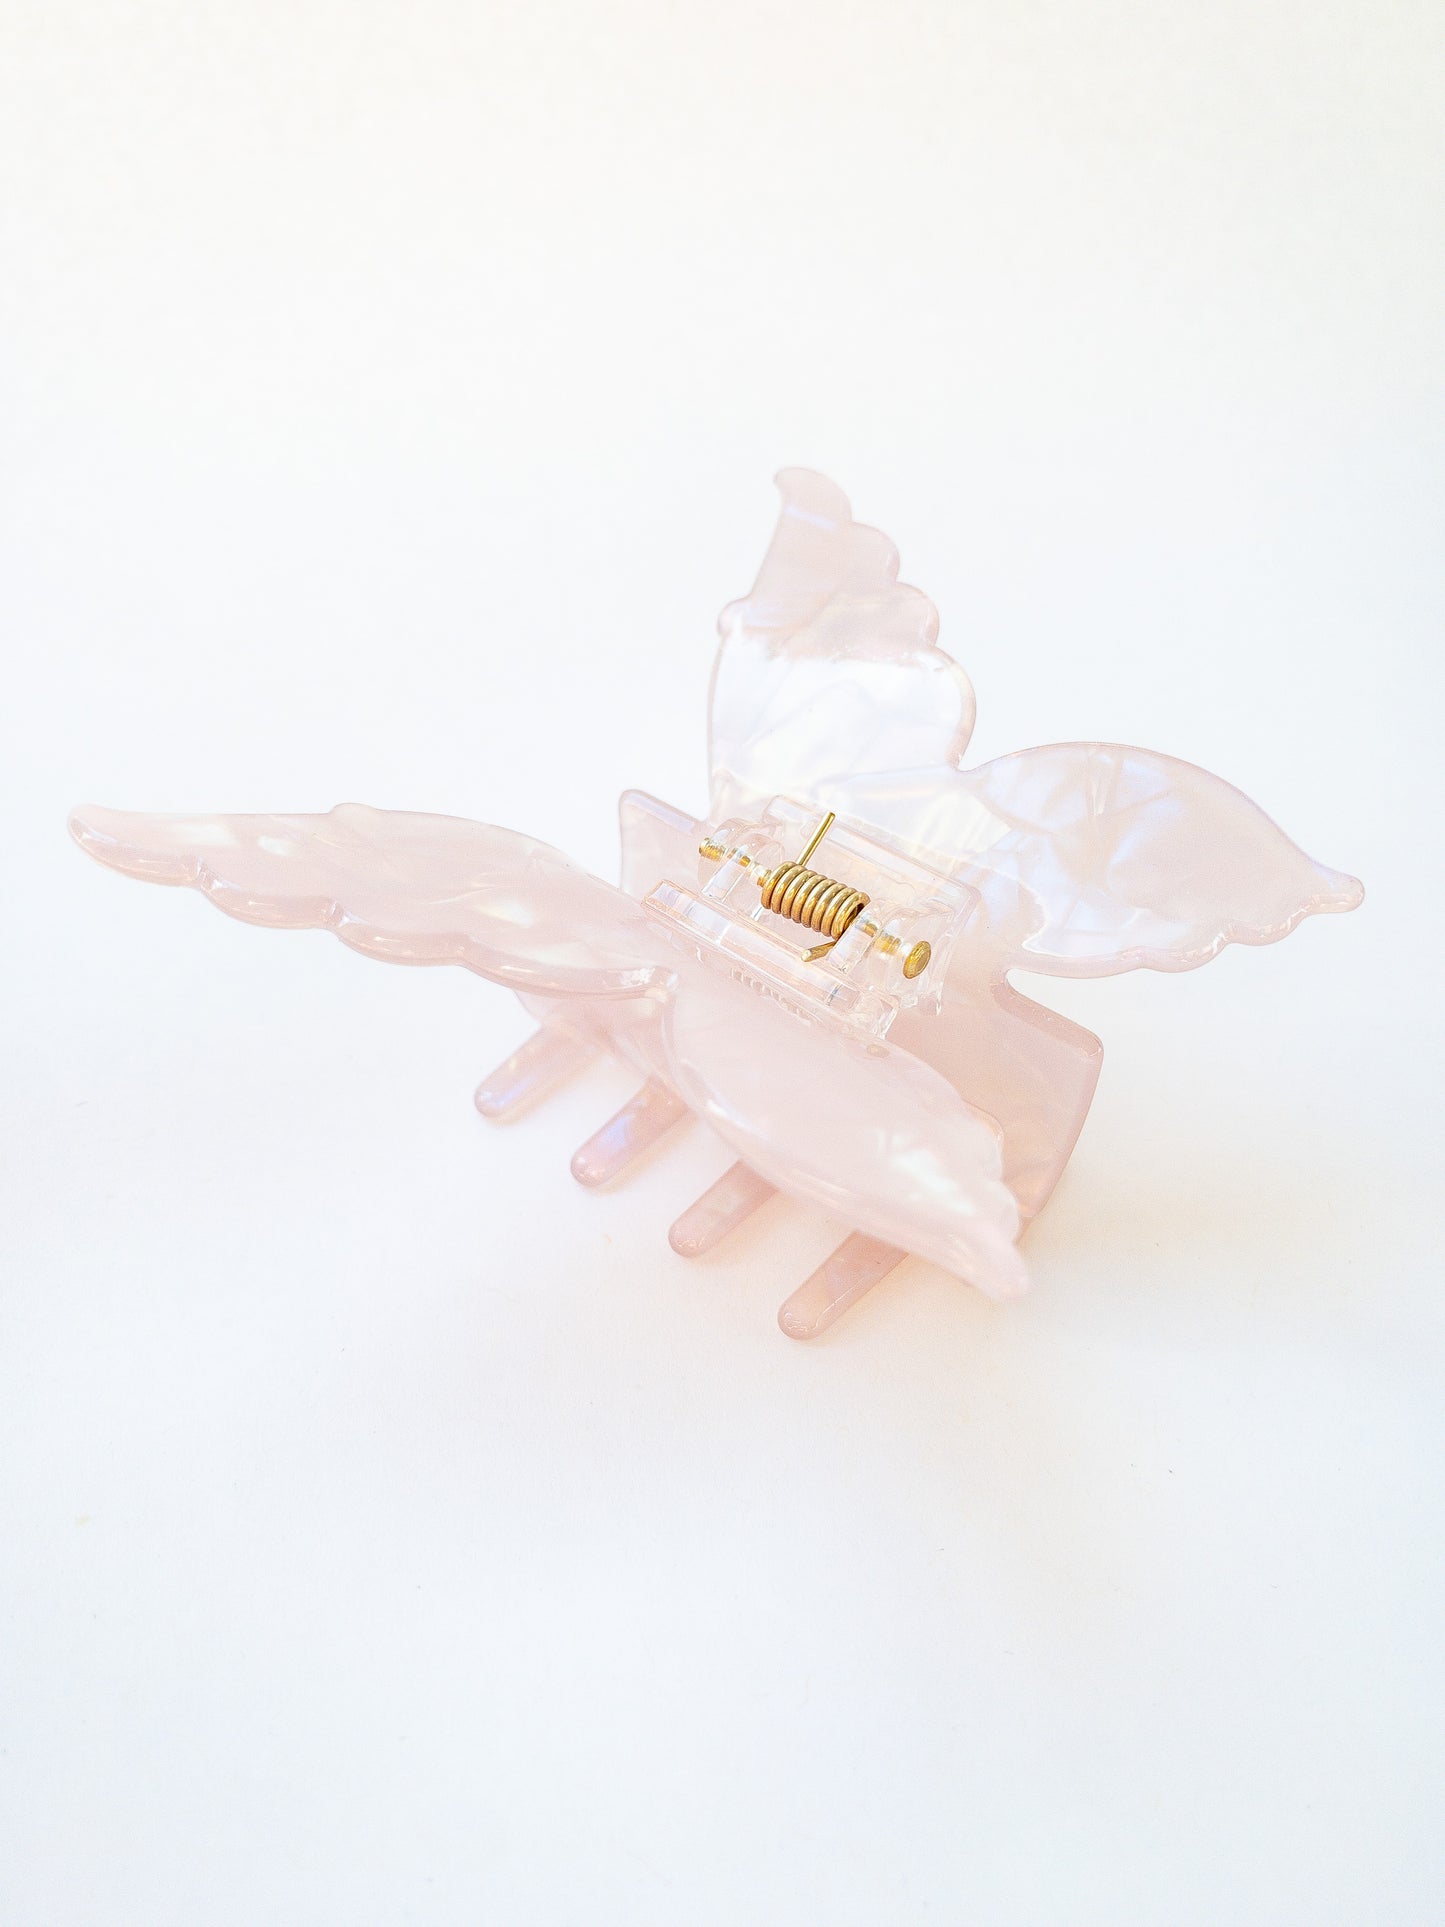 A shimmery, opalescent charm pink butterfly hair claw that glimmers in the light. This medium hair claw has detailed butterfly wings and has beautiful flecks of blue, green and yellow throughout. A gorgeous hair claw clip!